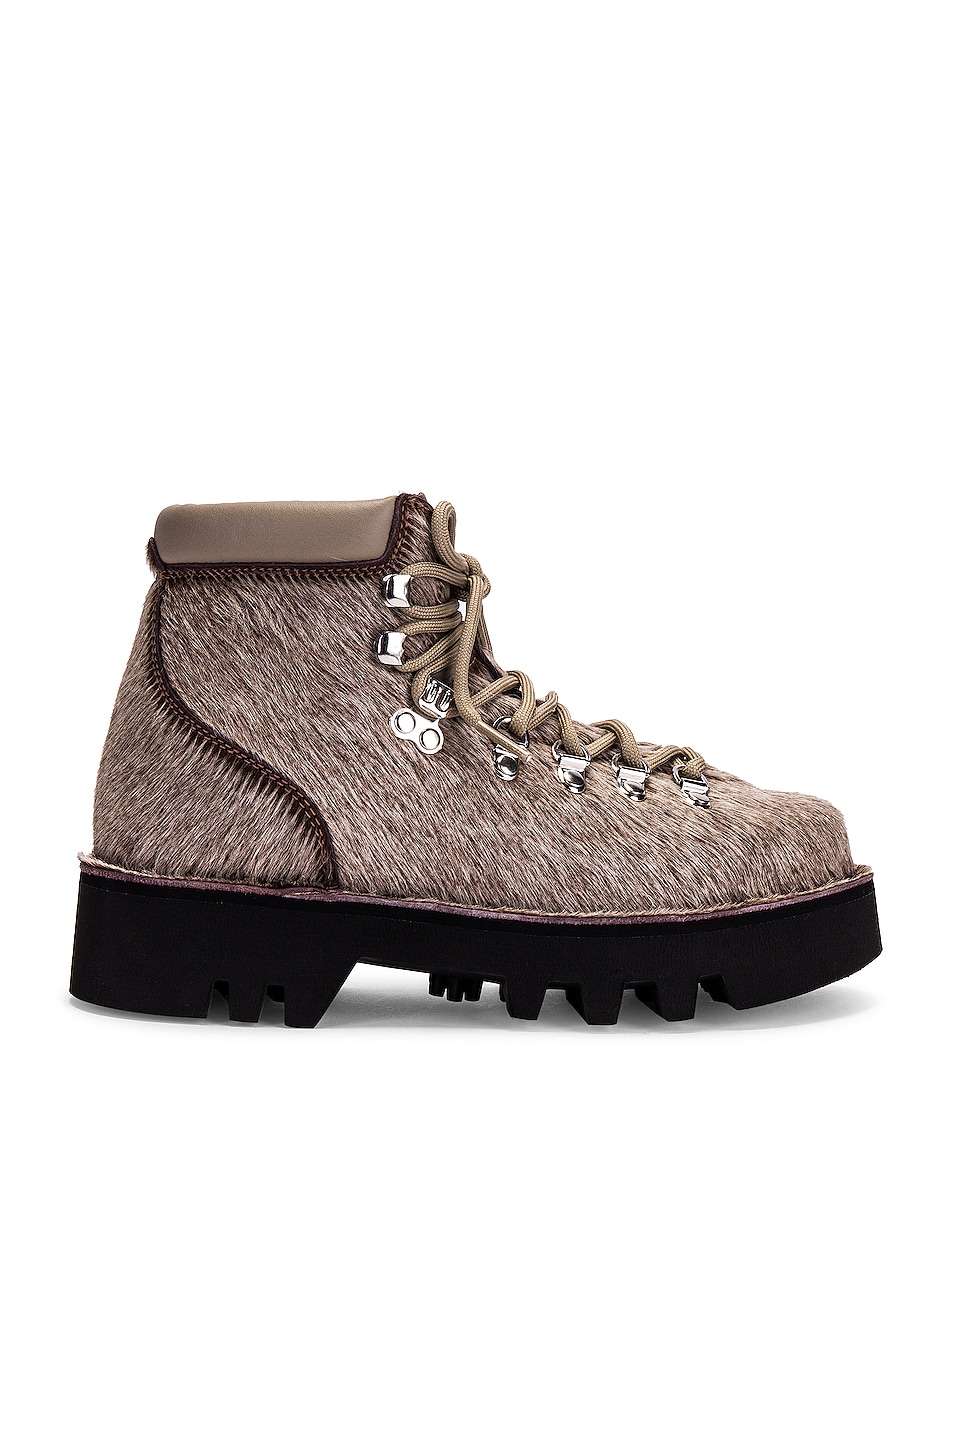 Image 1 of Diemme Galibier Boot in Grey Haircalf